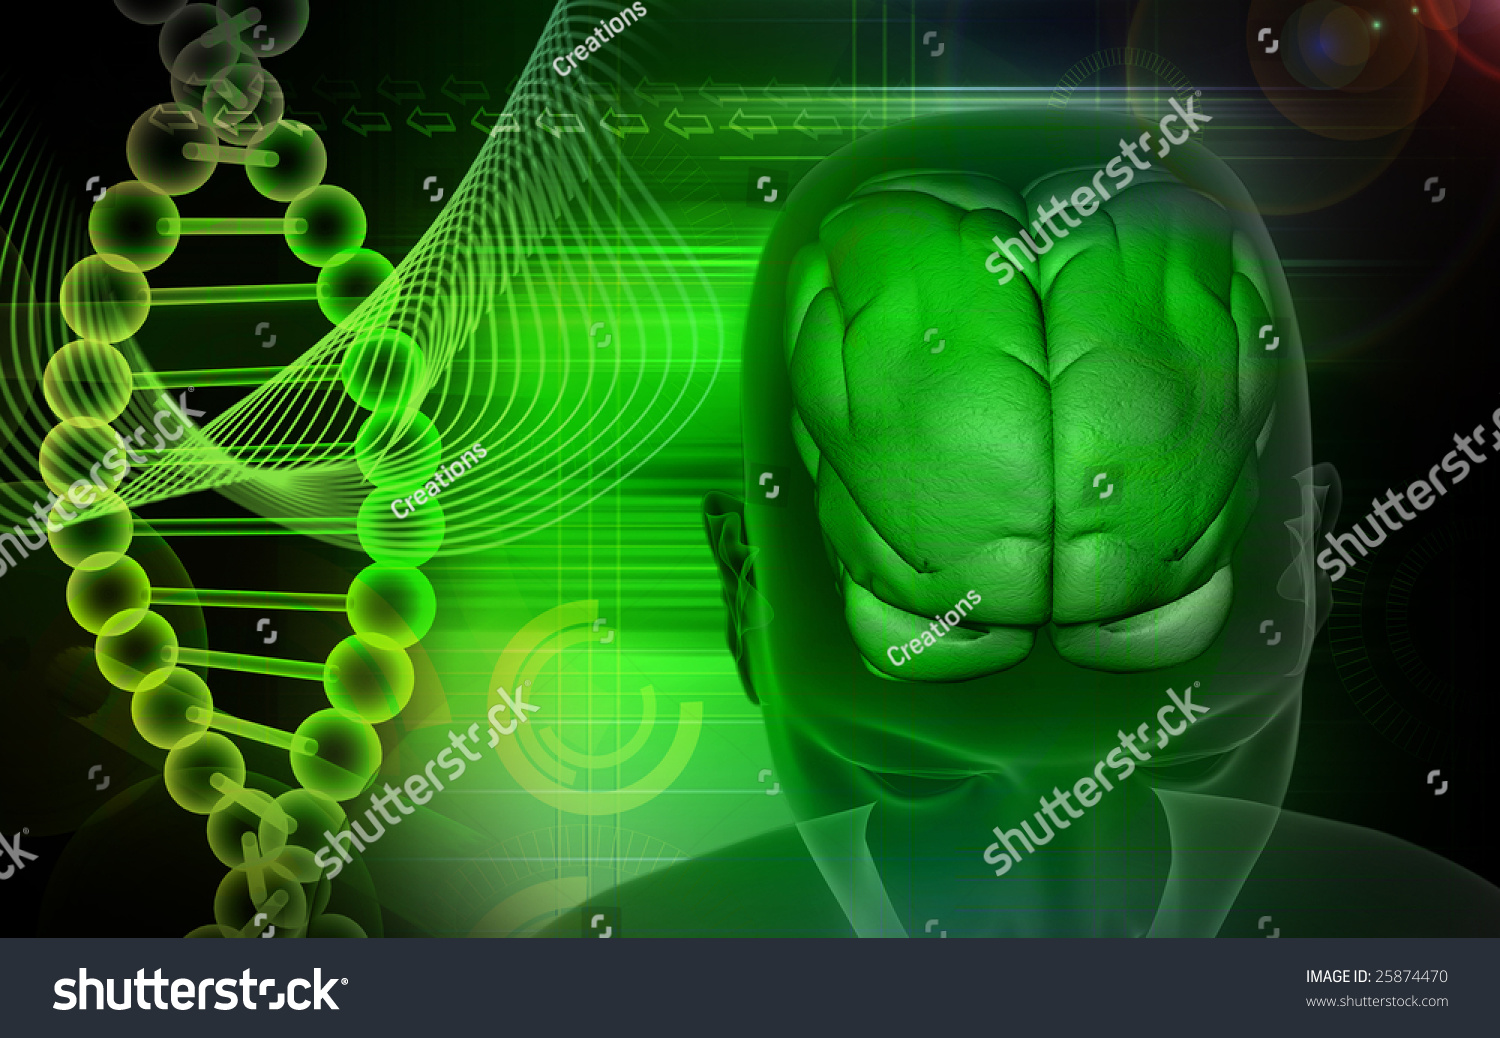 Digital Illustration Of A Human Brain And Dna 25874470 Shutterstock